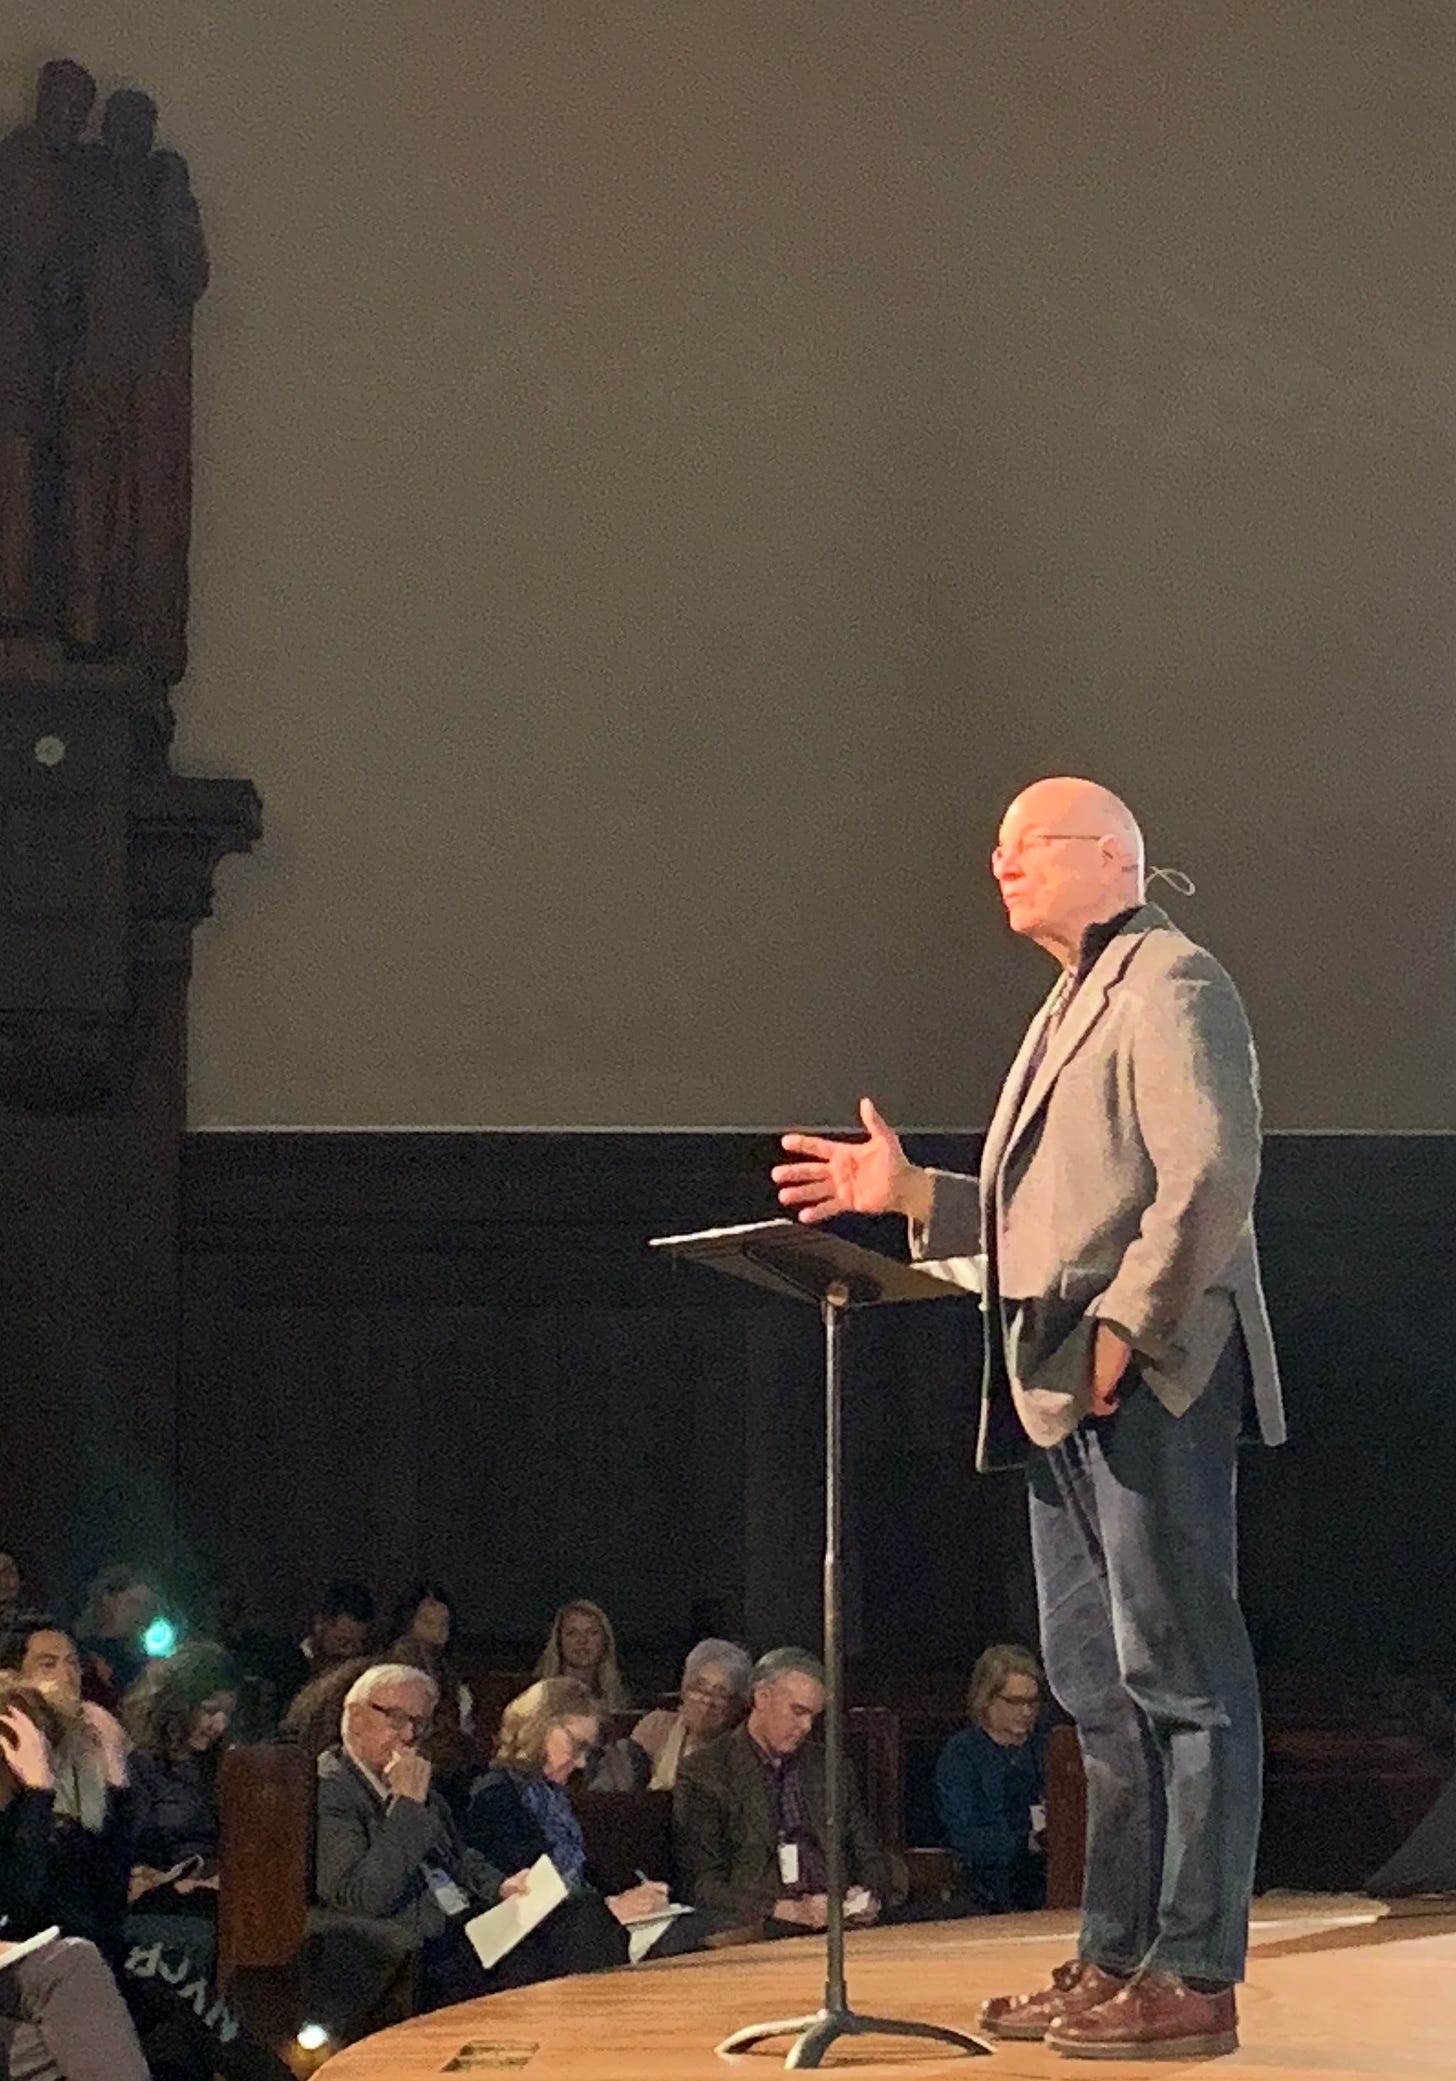 Photo of Tim Keller standing on the stage and speaking